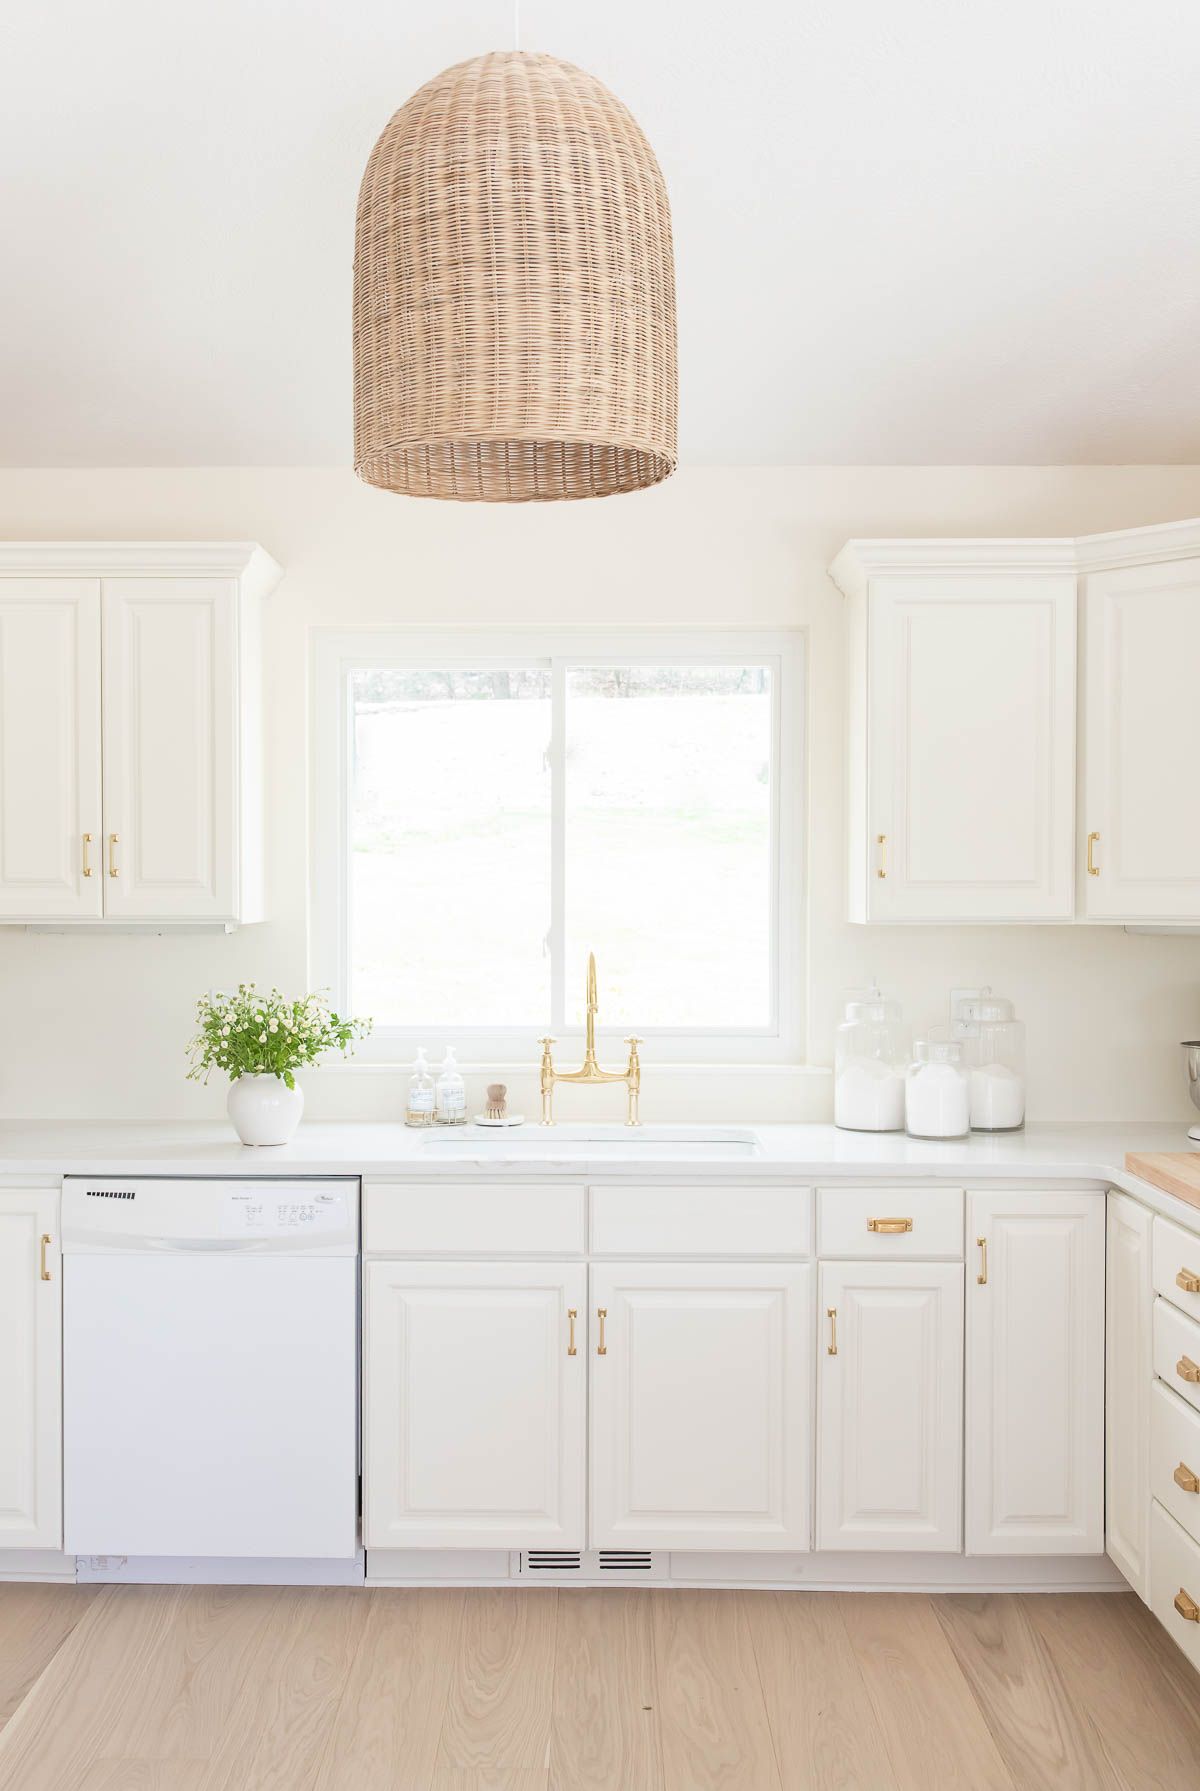 A white kitchen with white oak floors and a woven pendant